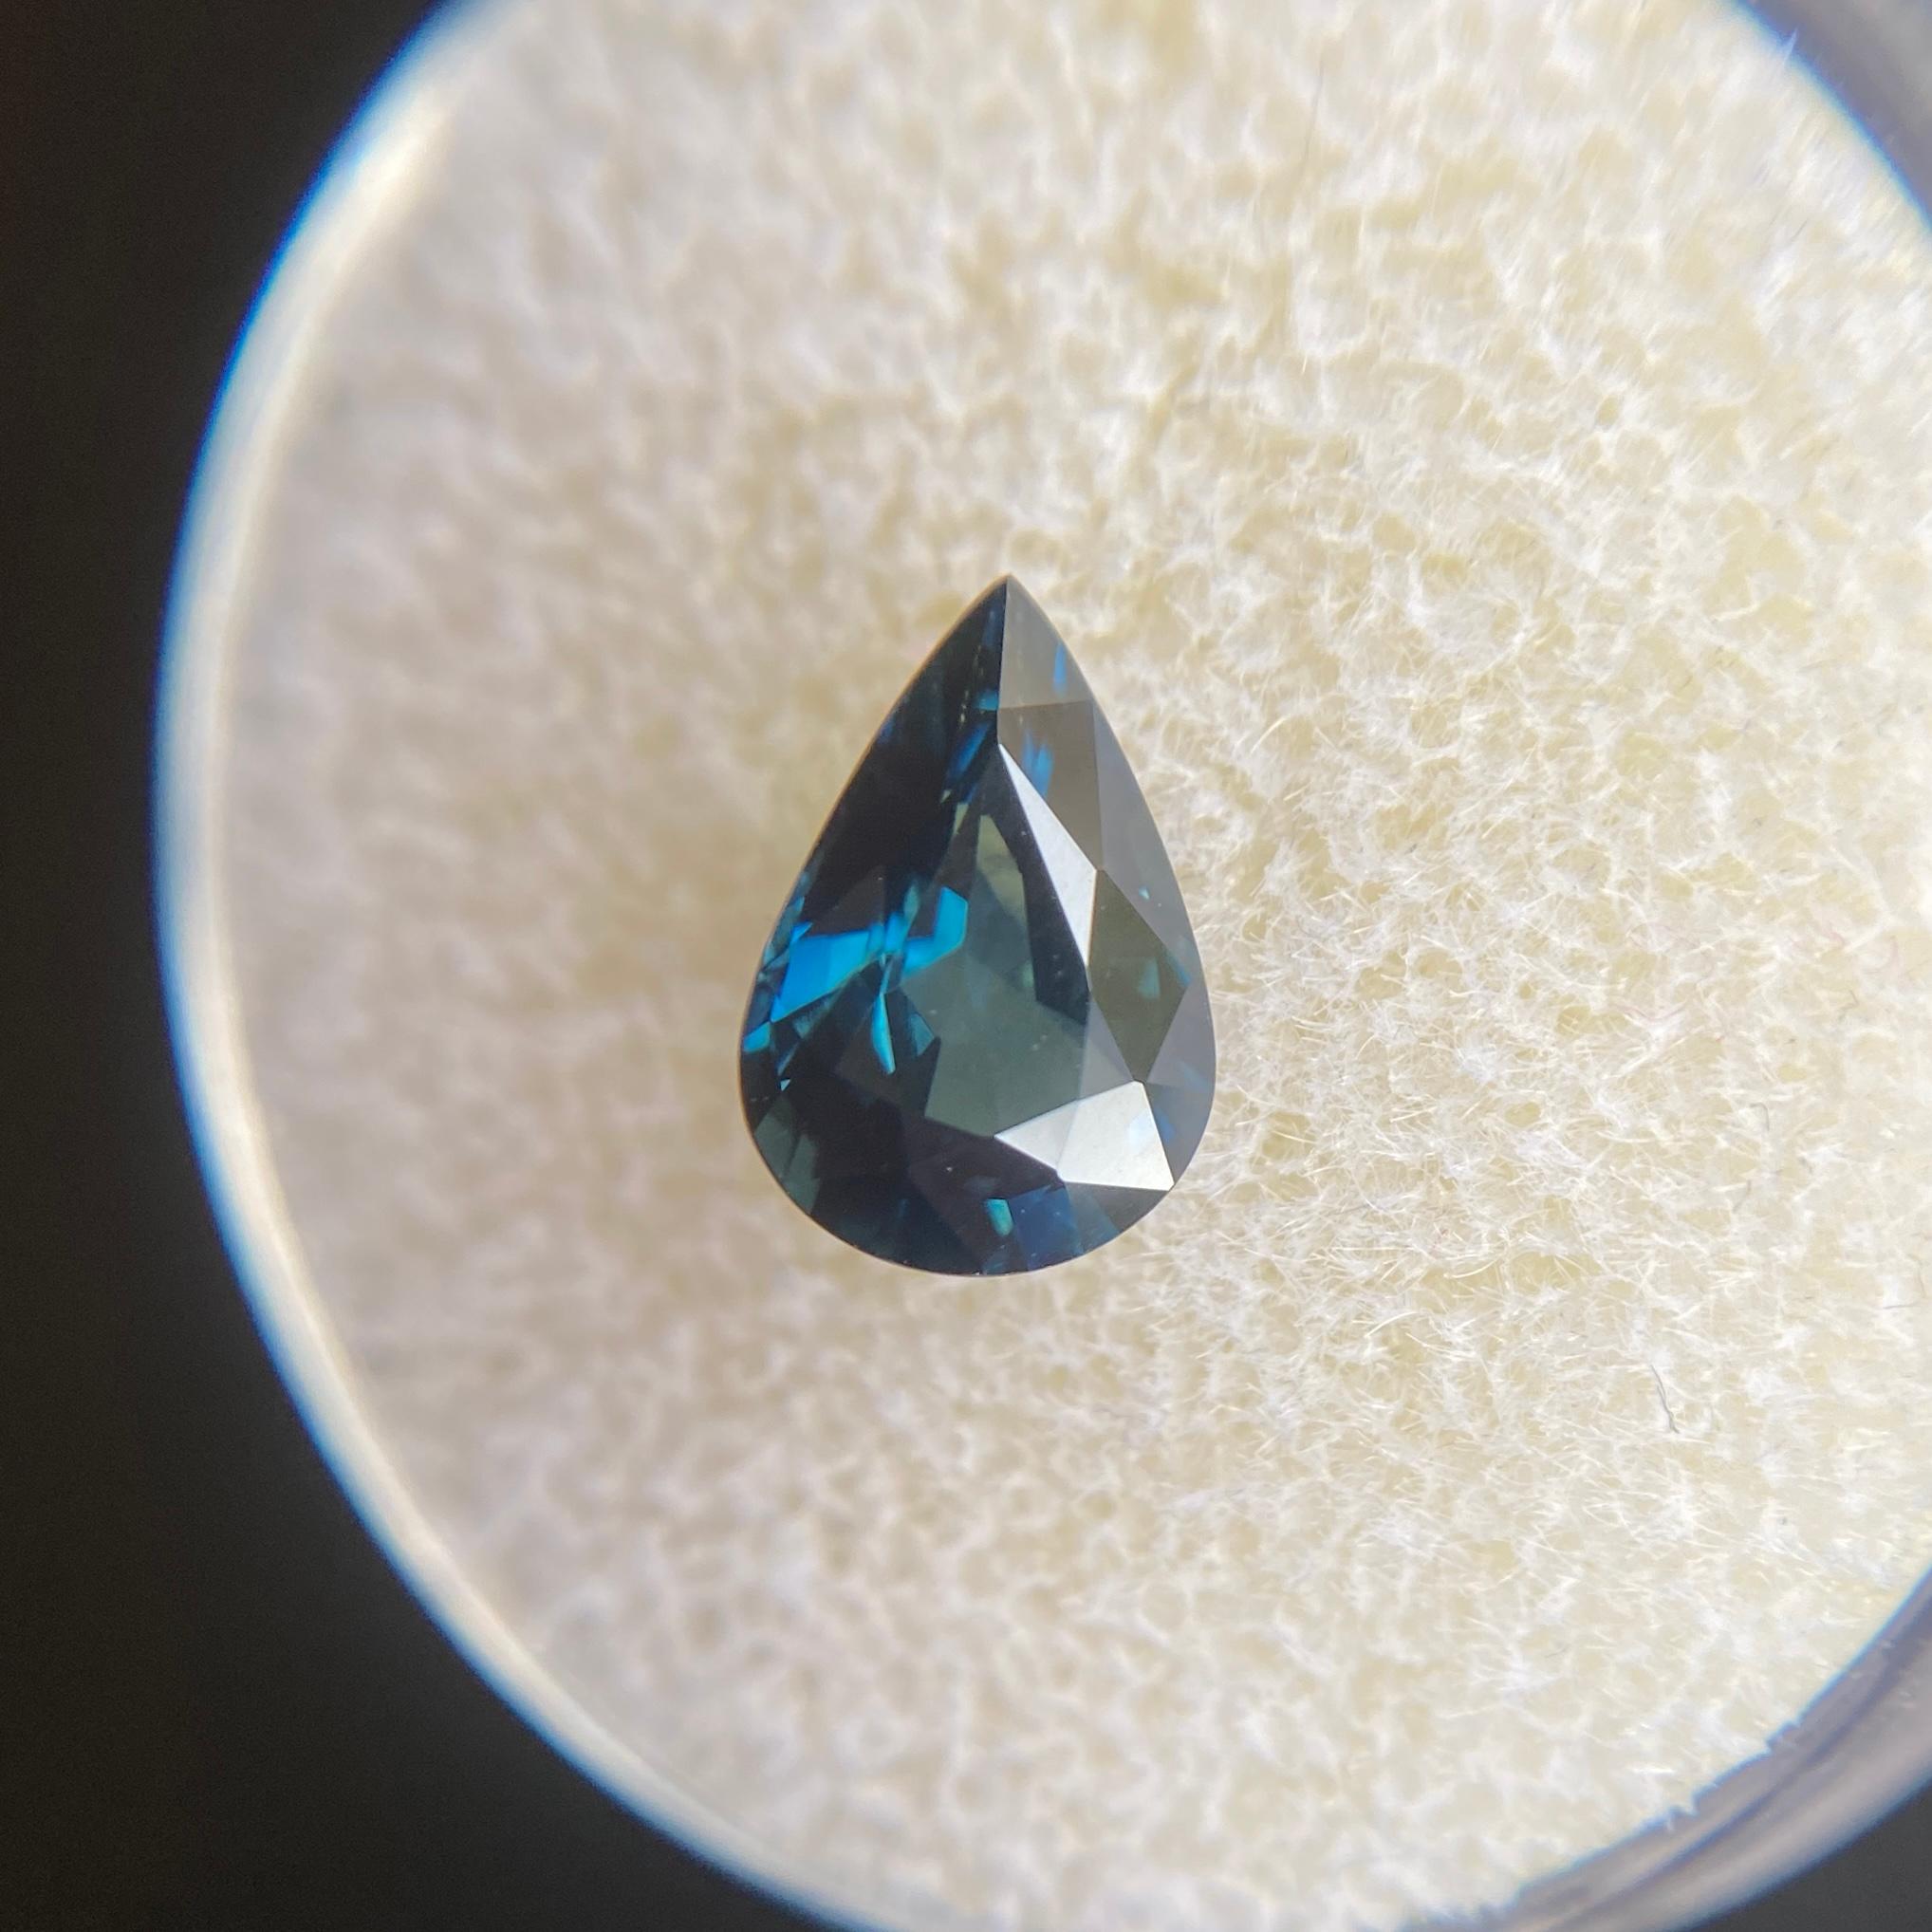 Australian Deep Blue Sapphire Gemstone.

Natural sapphire with a stunning deep greenish blue colour. 1.46 carat with very good clarity. Very clean stone.

Also has an excellent pear teardrop cut and ideal polish to show great shine and colour, would